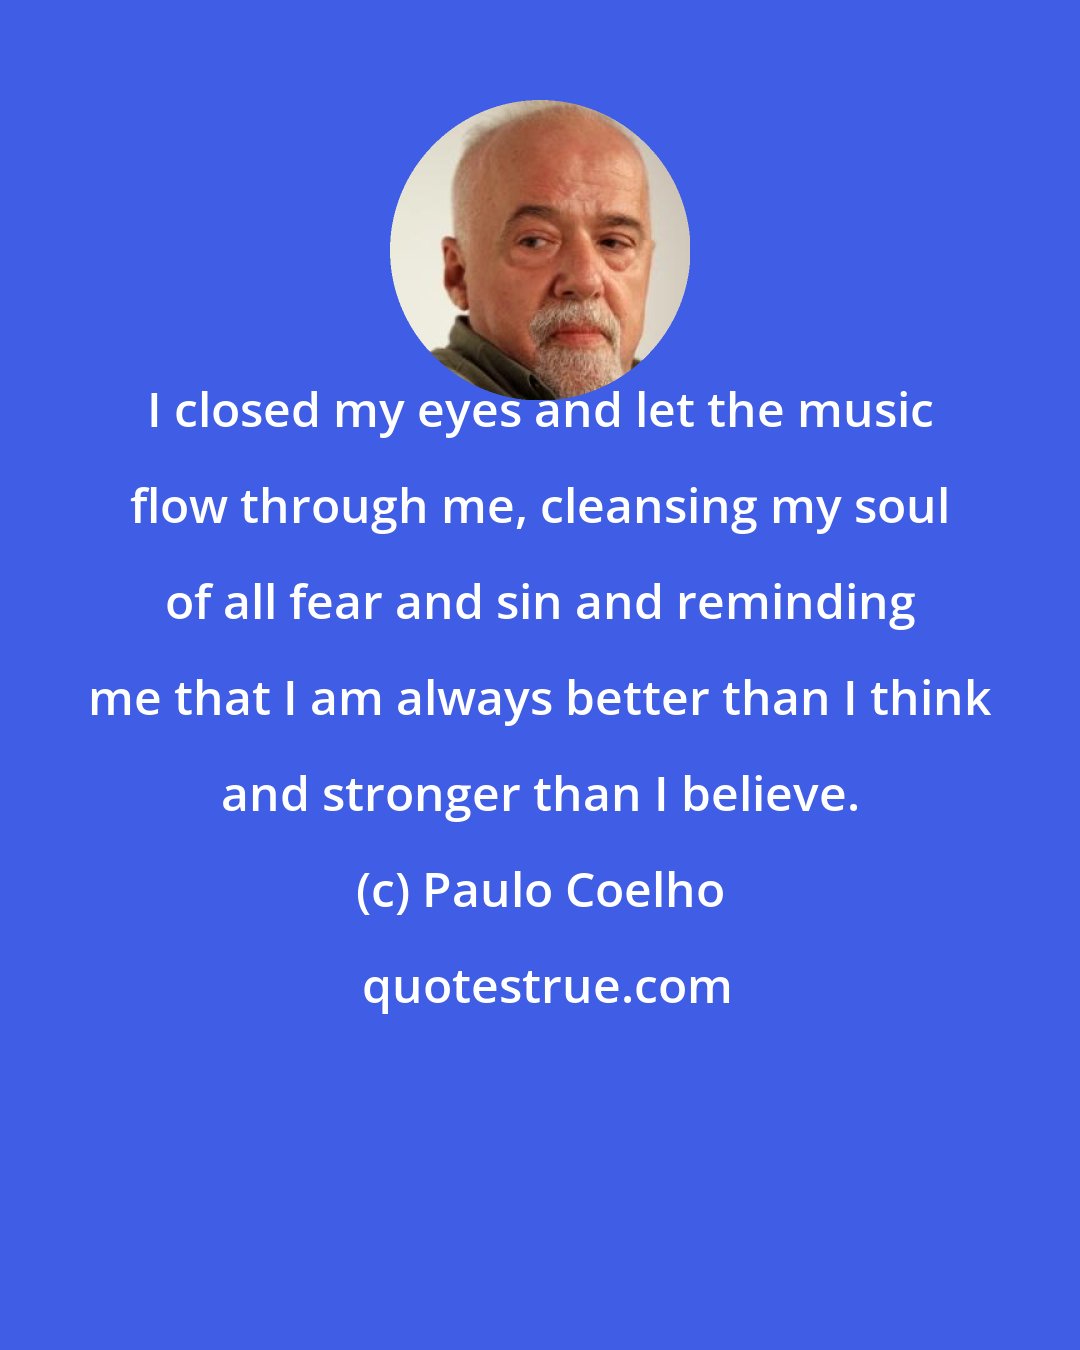 Paulo Coelho: I closed my eyes and let the music flow through me, cleansing my soul of all fear and sin and reminding me that I am always better than I think and stronger than I believe.